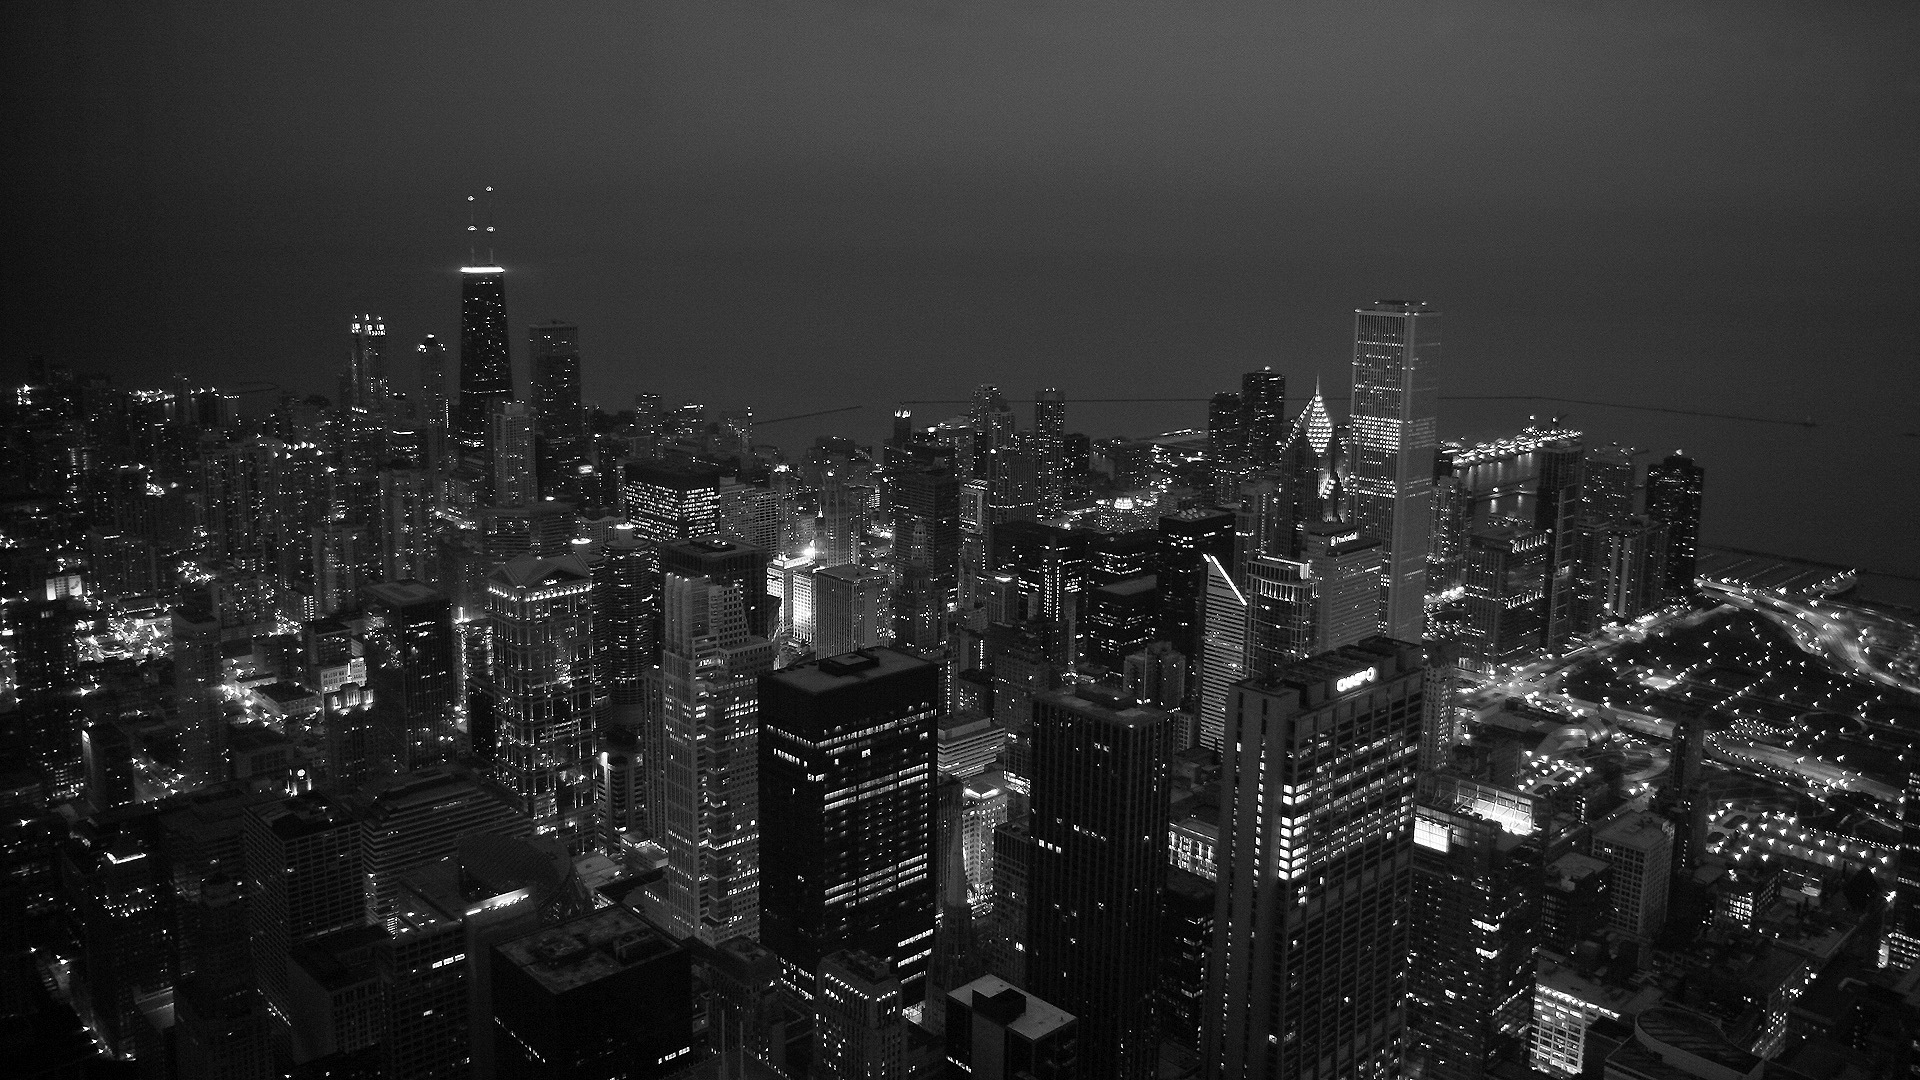 Free Download Skyline Desktop Night Photo Chicago Wallpapers Hd 19x1080 For Your Desktop Mobile Tablet Explore 45 Chicago Skyline Wallpaper For Computer High Resolution Chicago Skyline Wallpaper Chicago